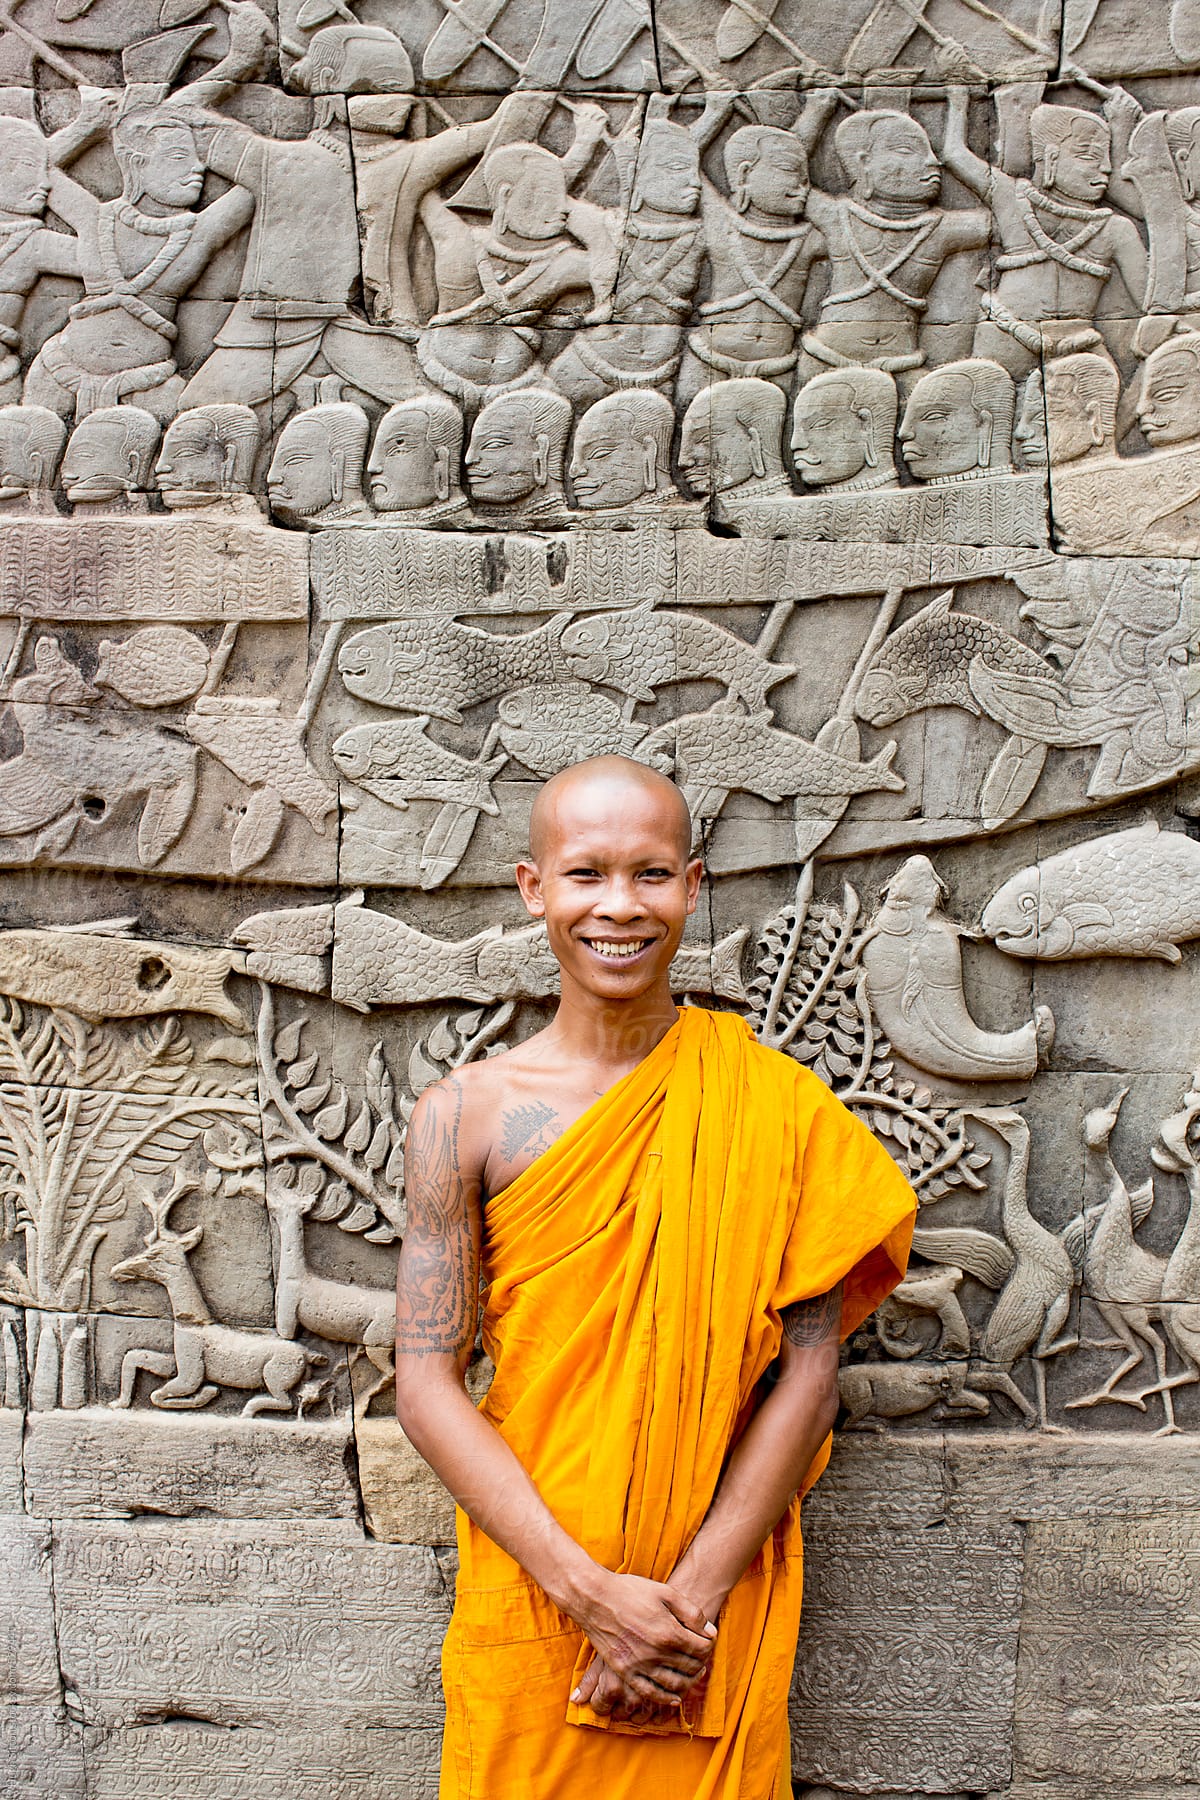 Buddhist monk standing in front of wall carvings. Bayon Temple. Angkor Wat.